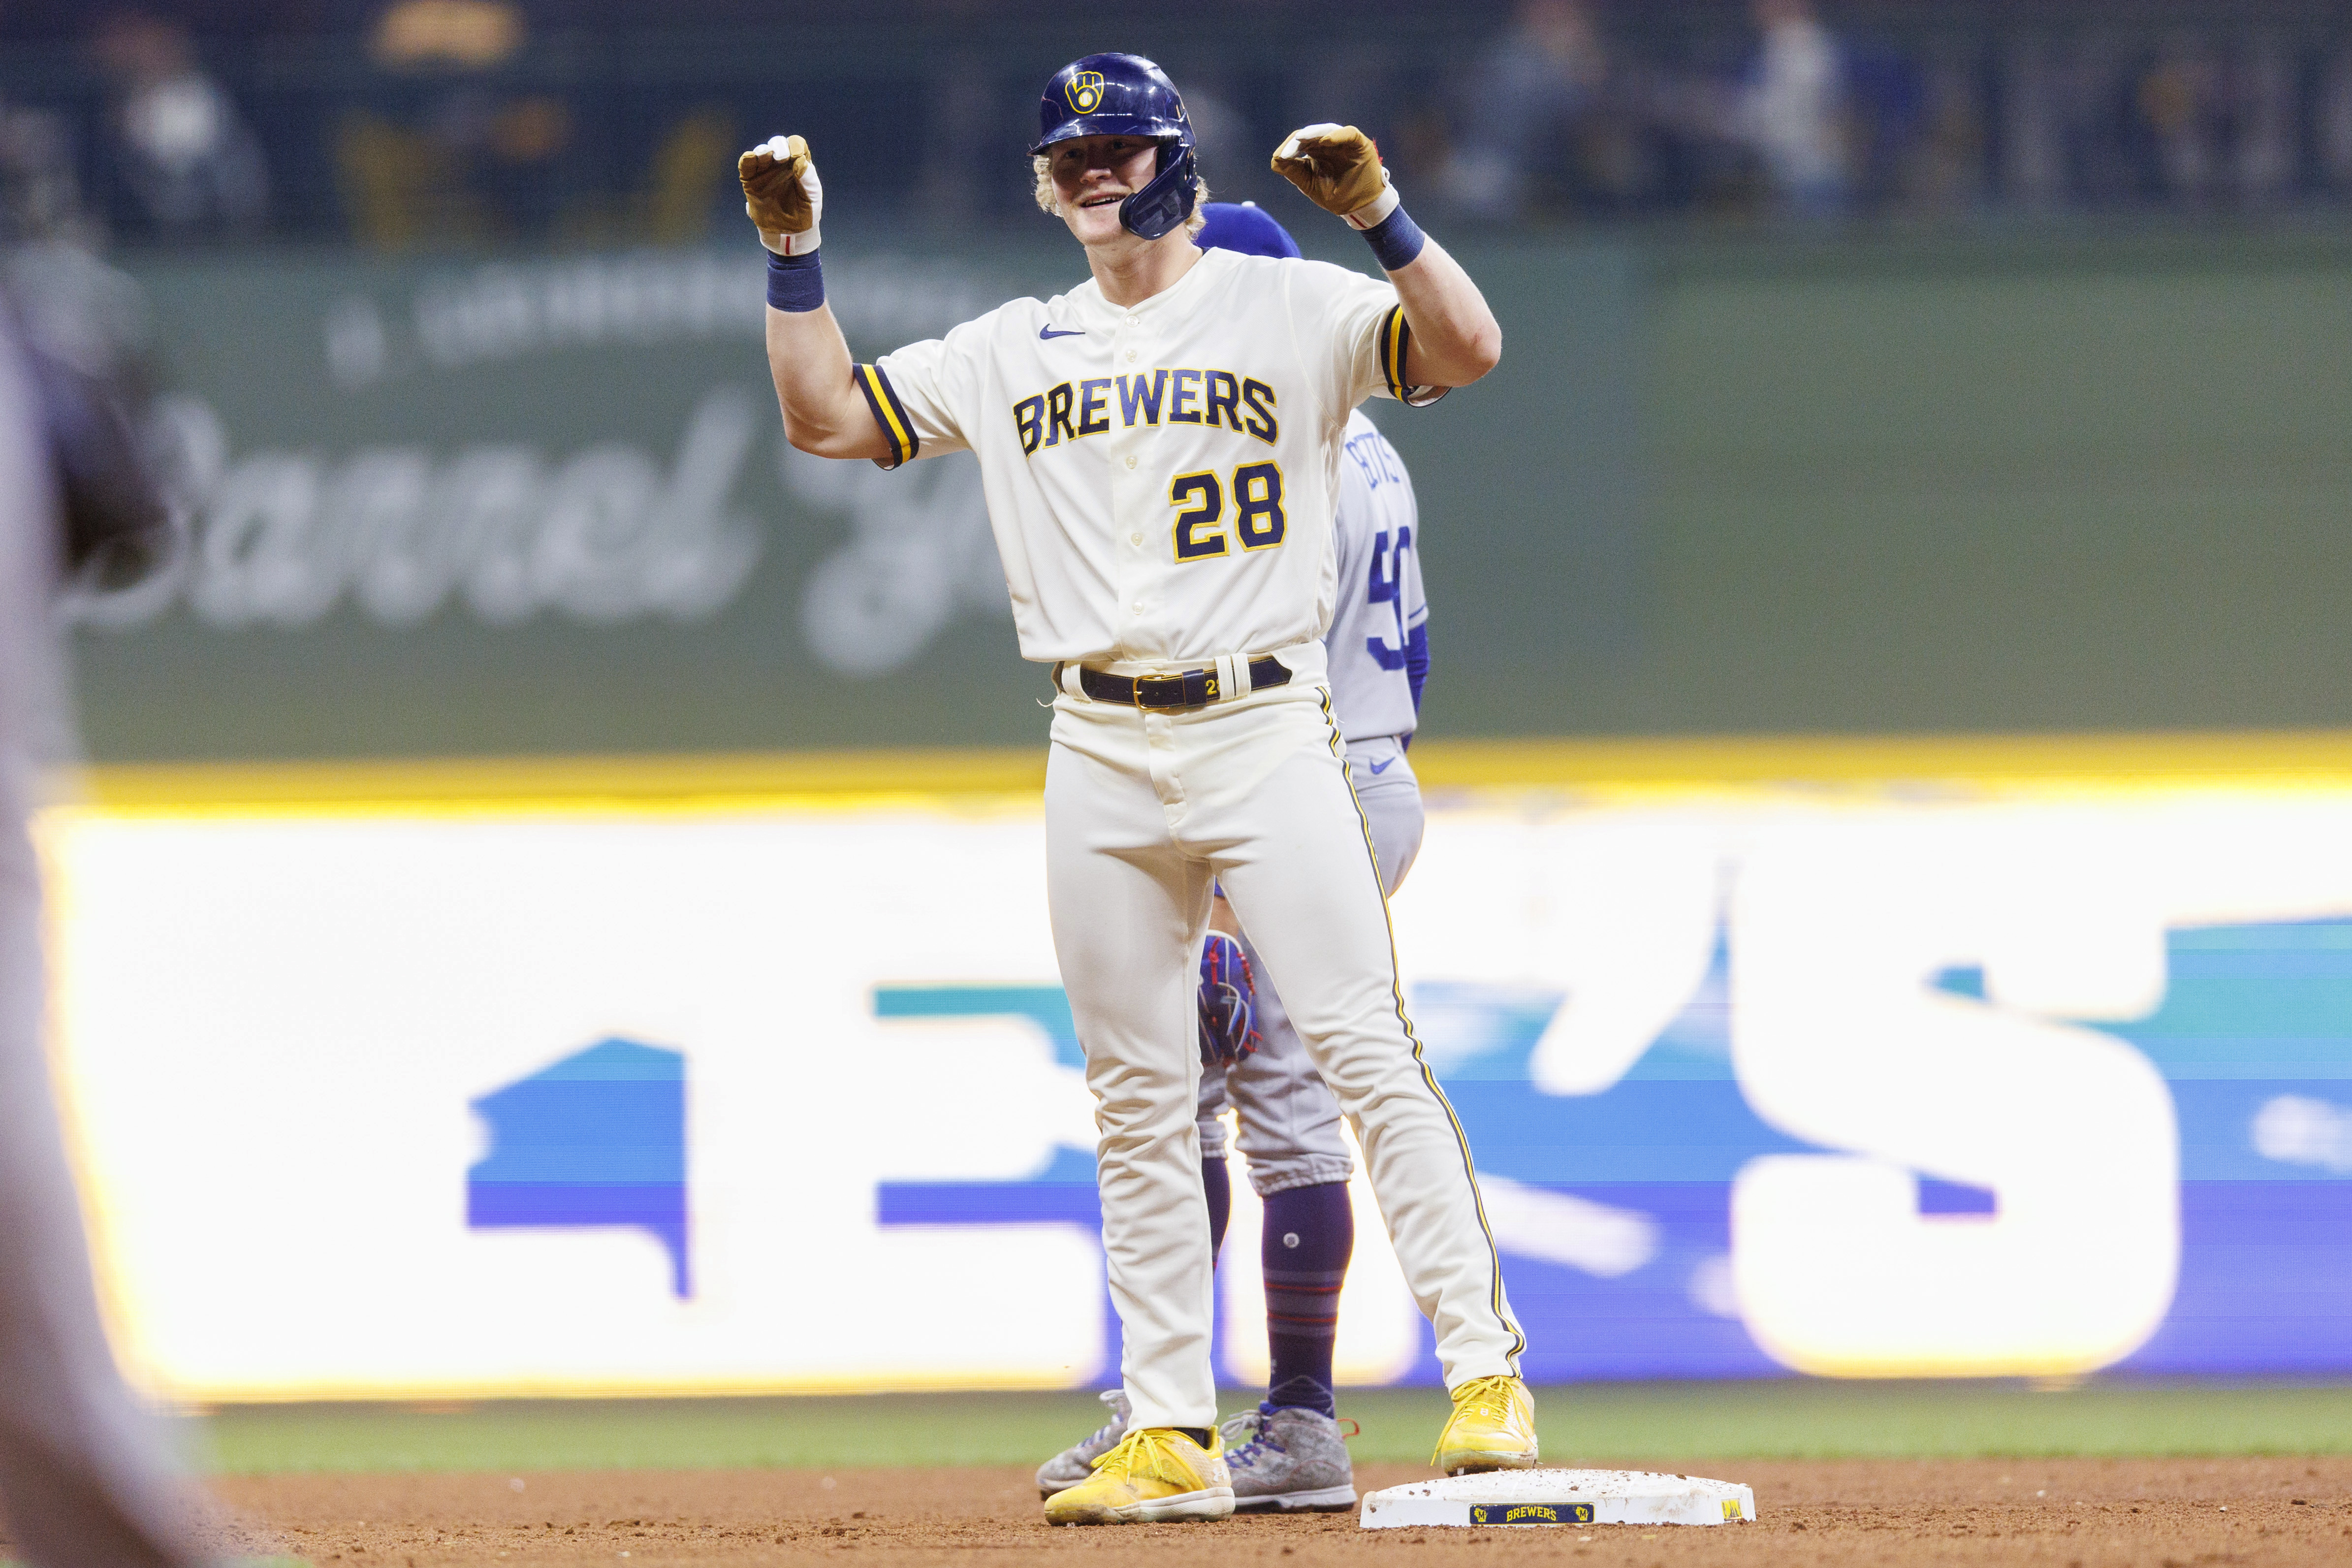 Brewers cool off red-hot Dodgers to open series